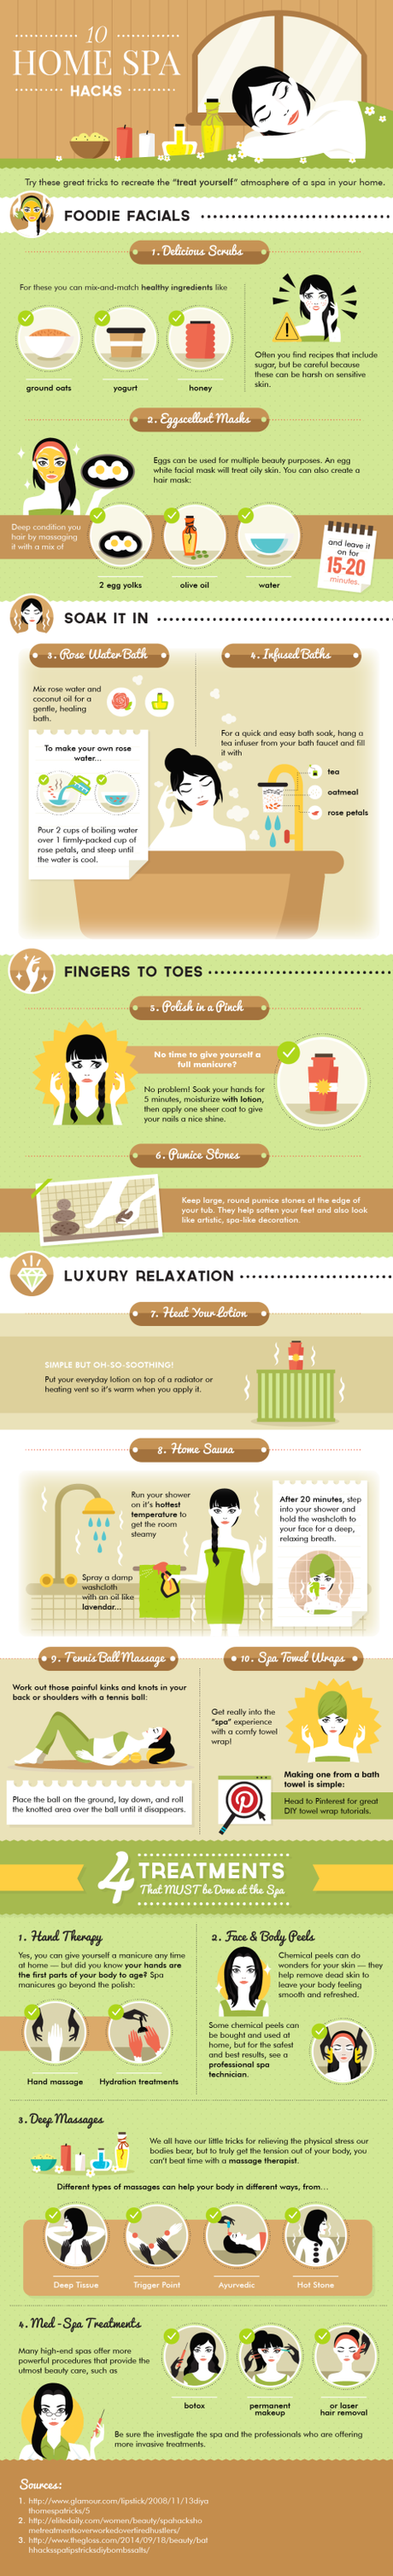 Relax with these Spa Hacks from Bewildered Bug